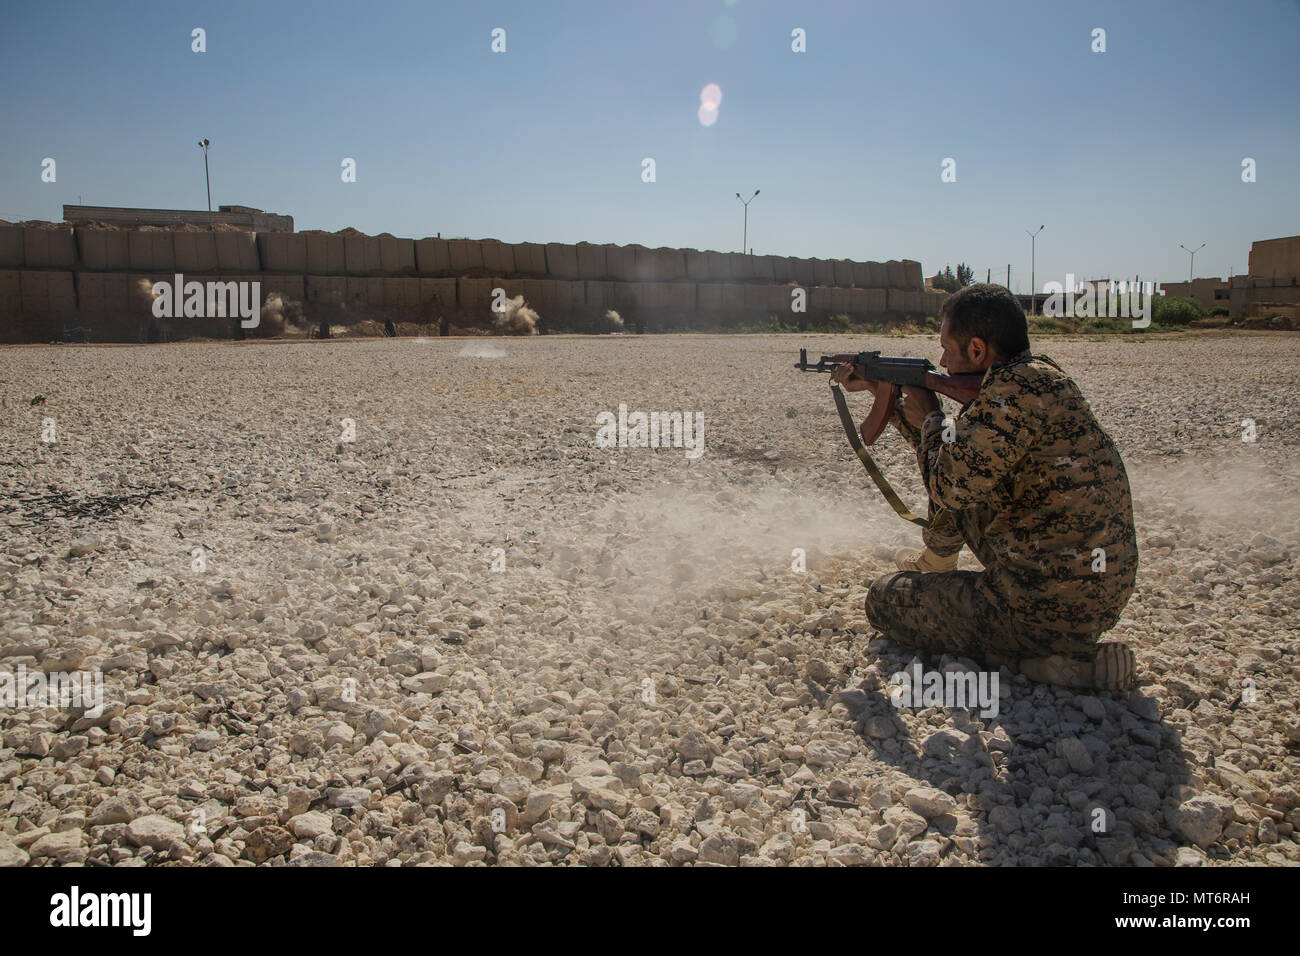 A Syrian Arab trainee fires his rifle at a marksmanship range in Northern Syria, July 31 2017. The Syrian Democratic Forces continue to recruit and train Syrians of all ethnicities who are passionate about joining the counter-ISIS fight to eliminate terror from their home. The SDF have proven themselves able to conduct clearance operations while respecting the Law of War in their liberation of Raqqah. (U.S. Army photo by Sgt. Mitchell Ryan) Stock Photo